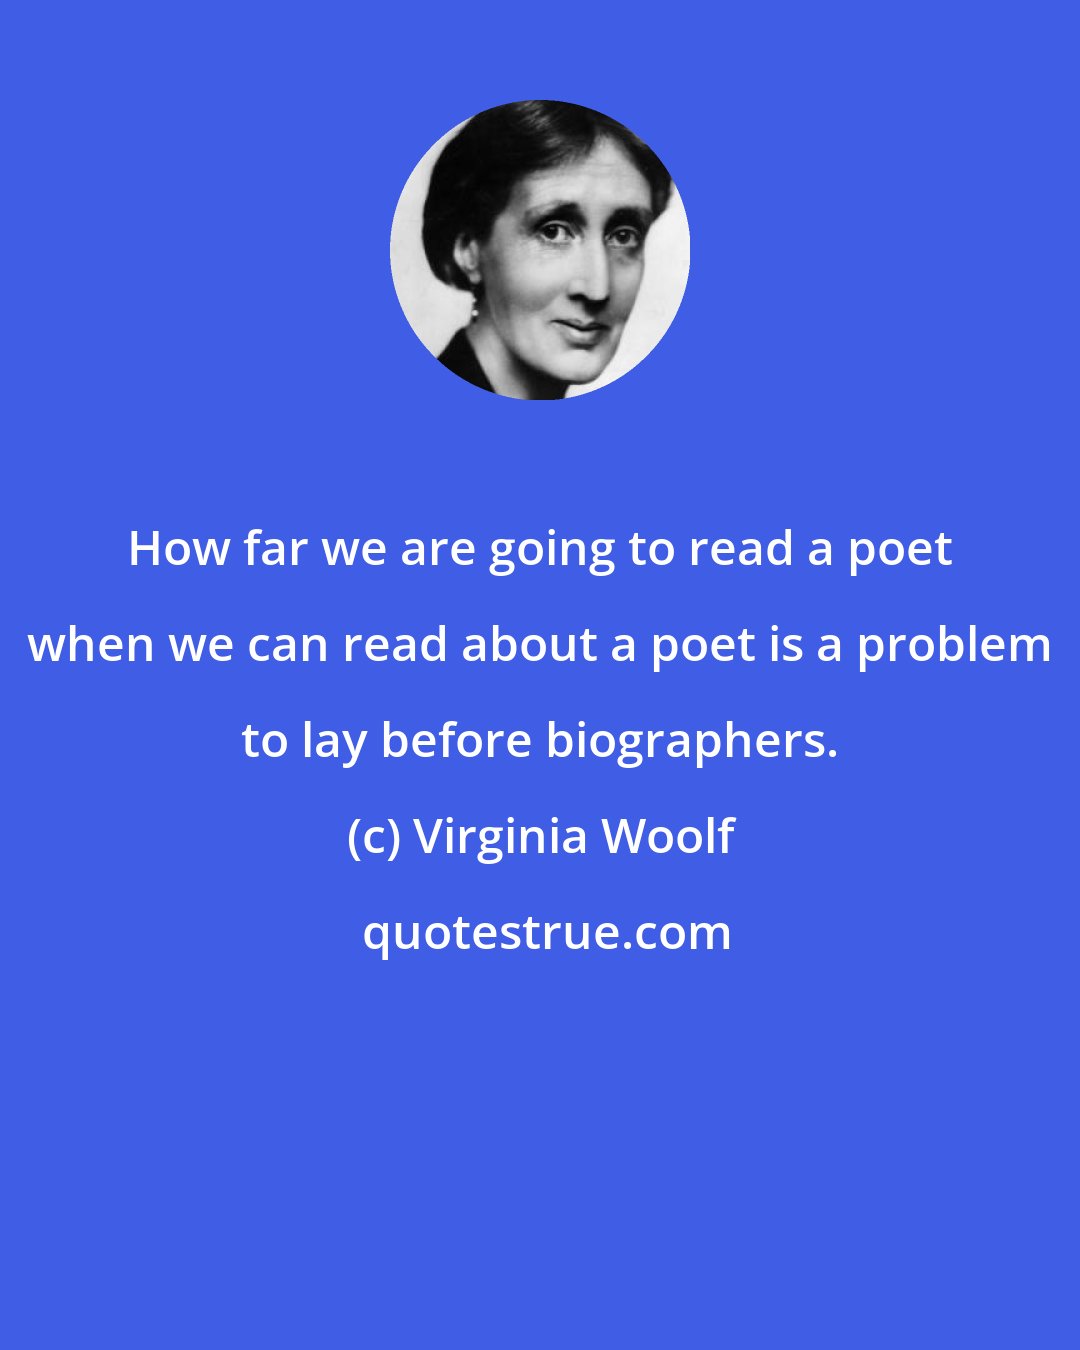 Virginia Woolf: How far we are going to read a poet when we can read about a poet is a problem to lay before biographers.